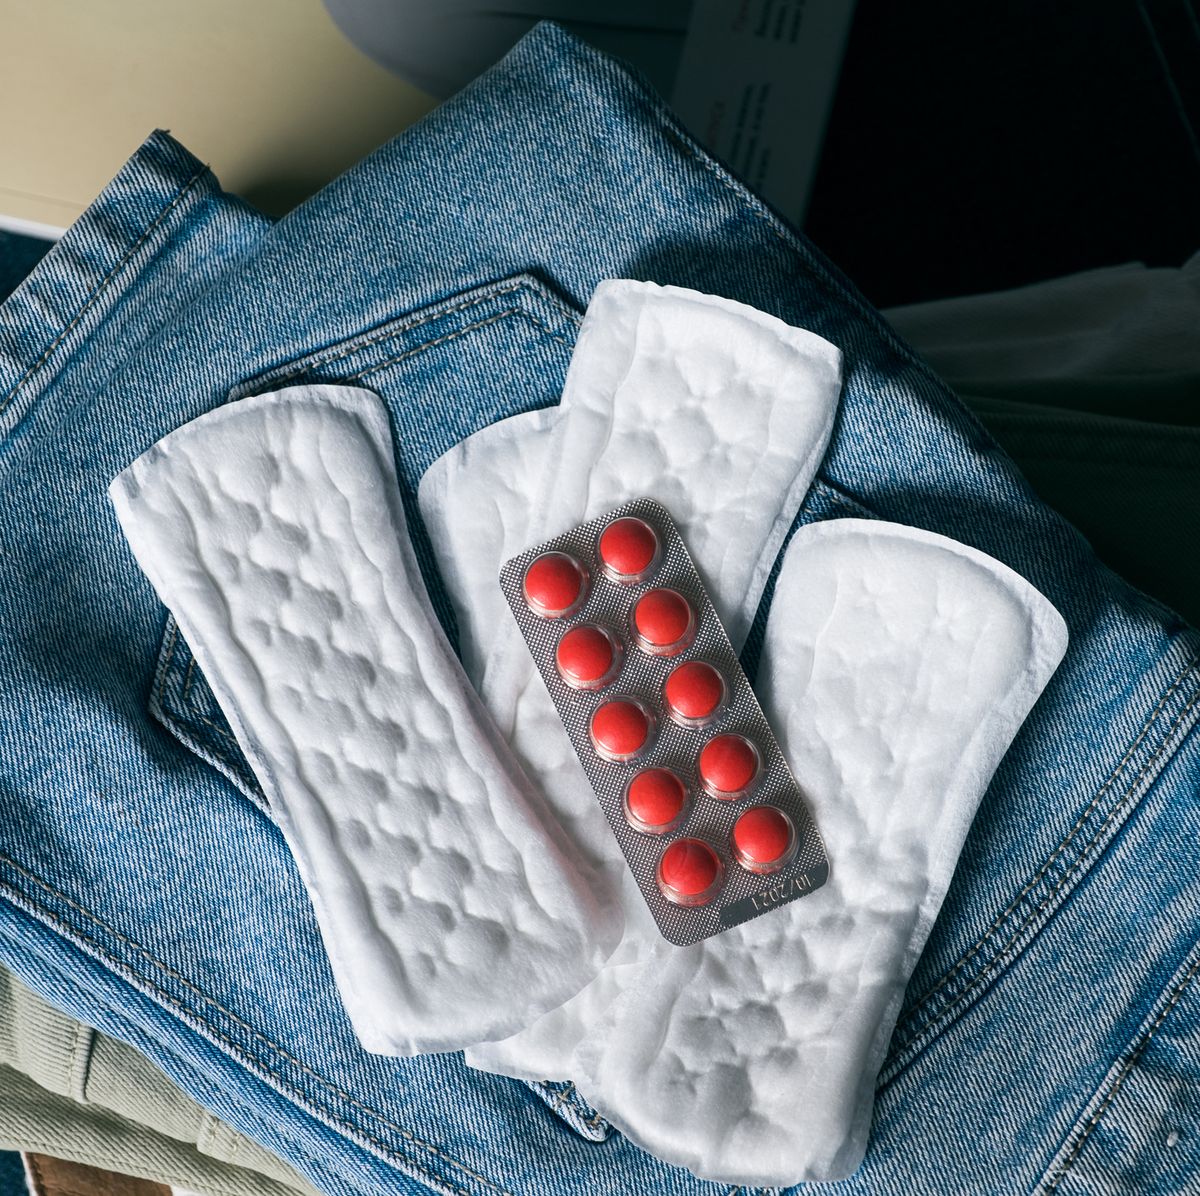 What Is Withdrawal Bleeding From Birth Control?